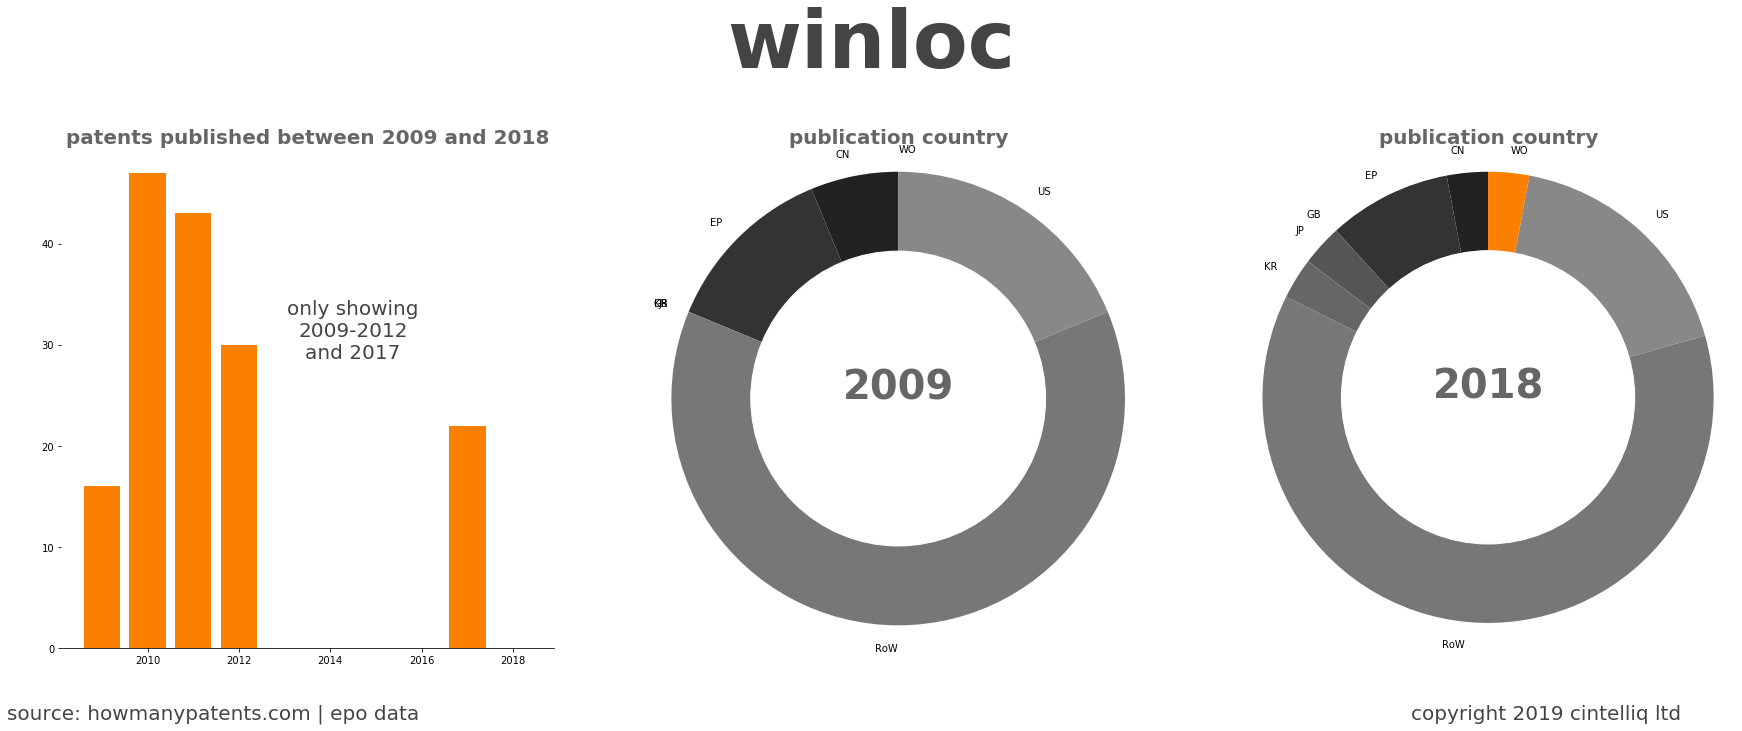 summary of patents for Winloc